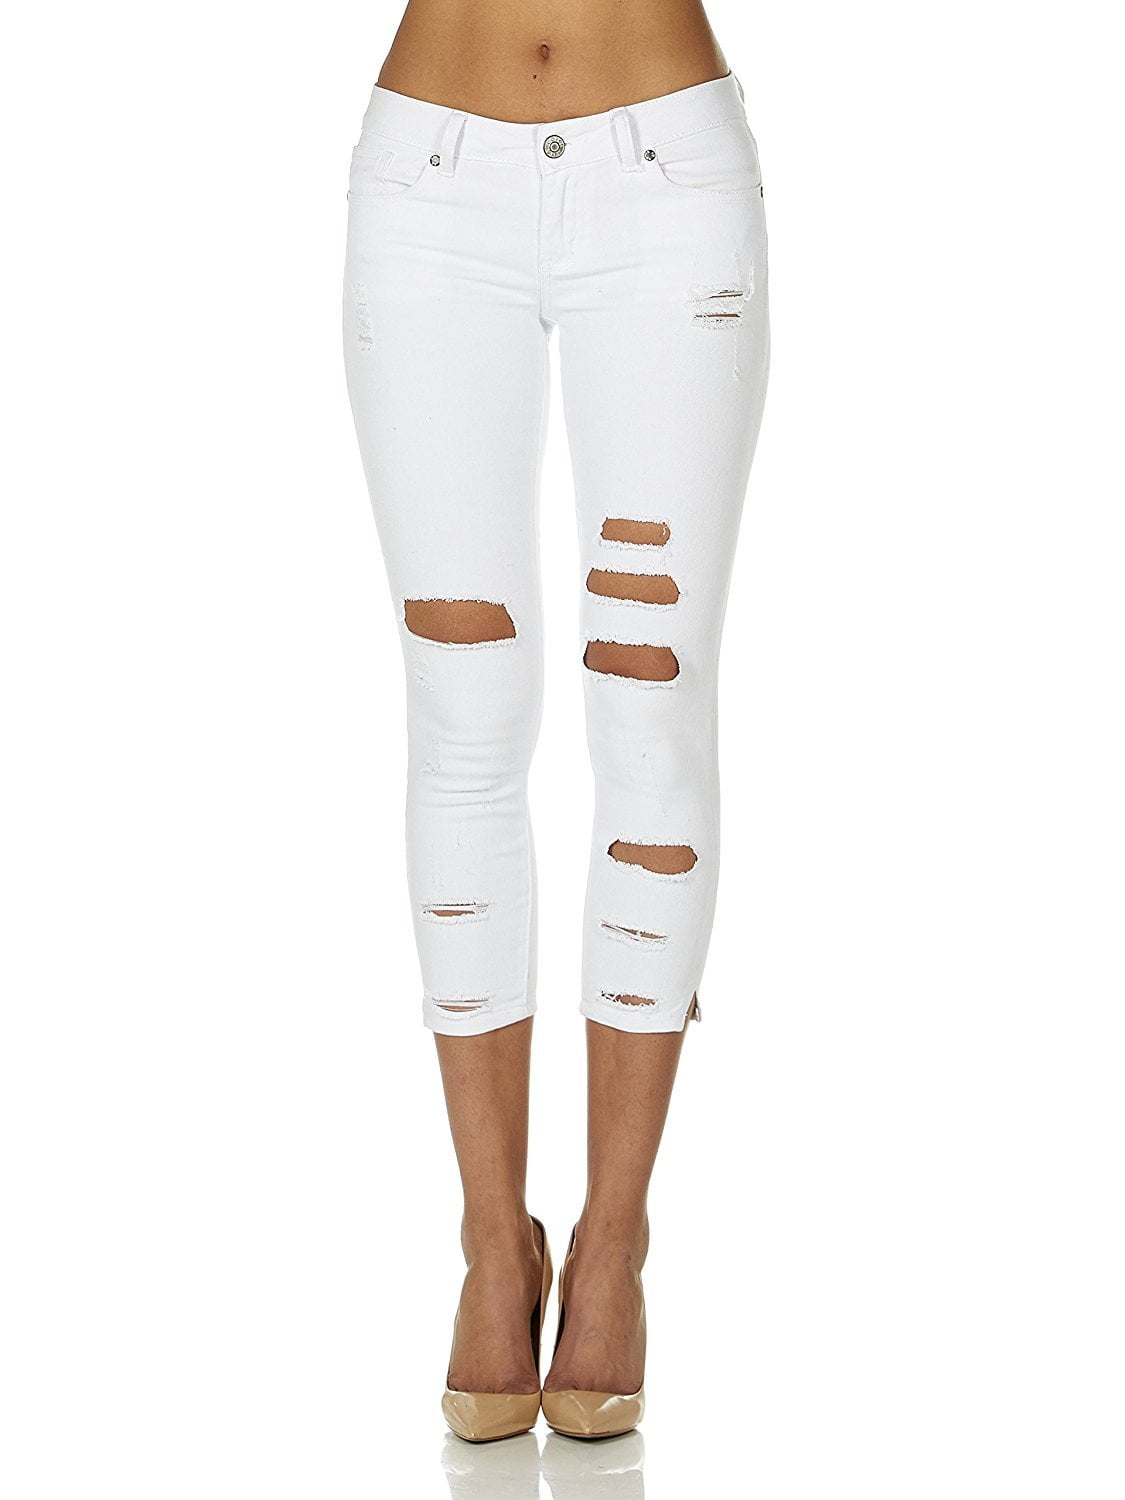 vip-jeans-cute-ripped-jeans-for-women-distressed-washed-skinny